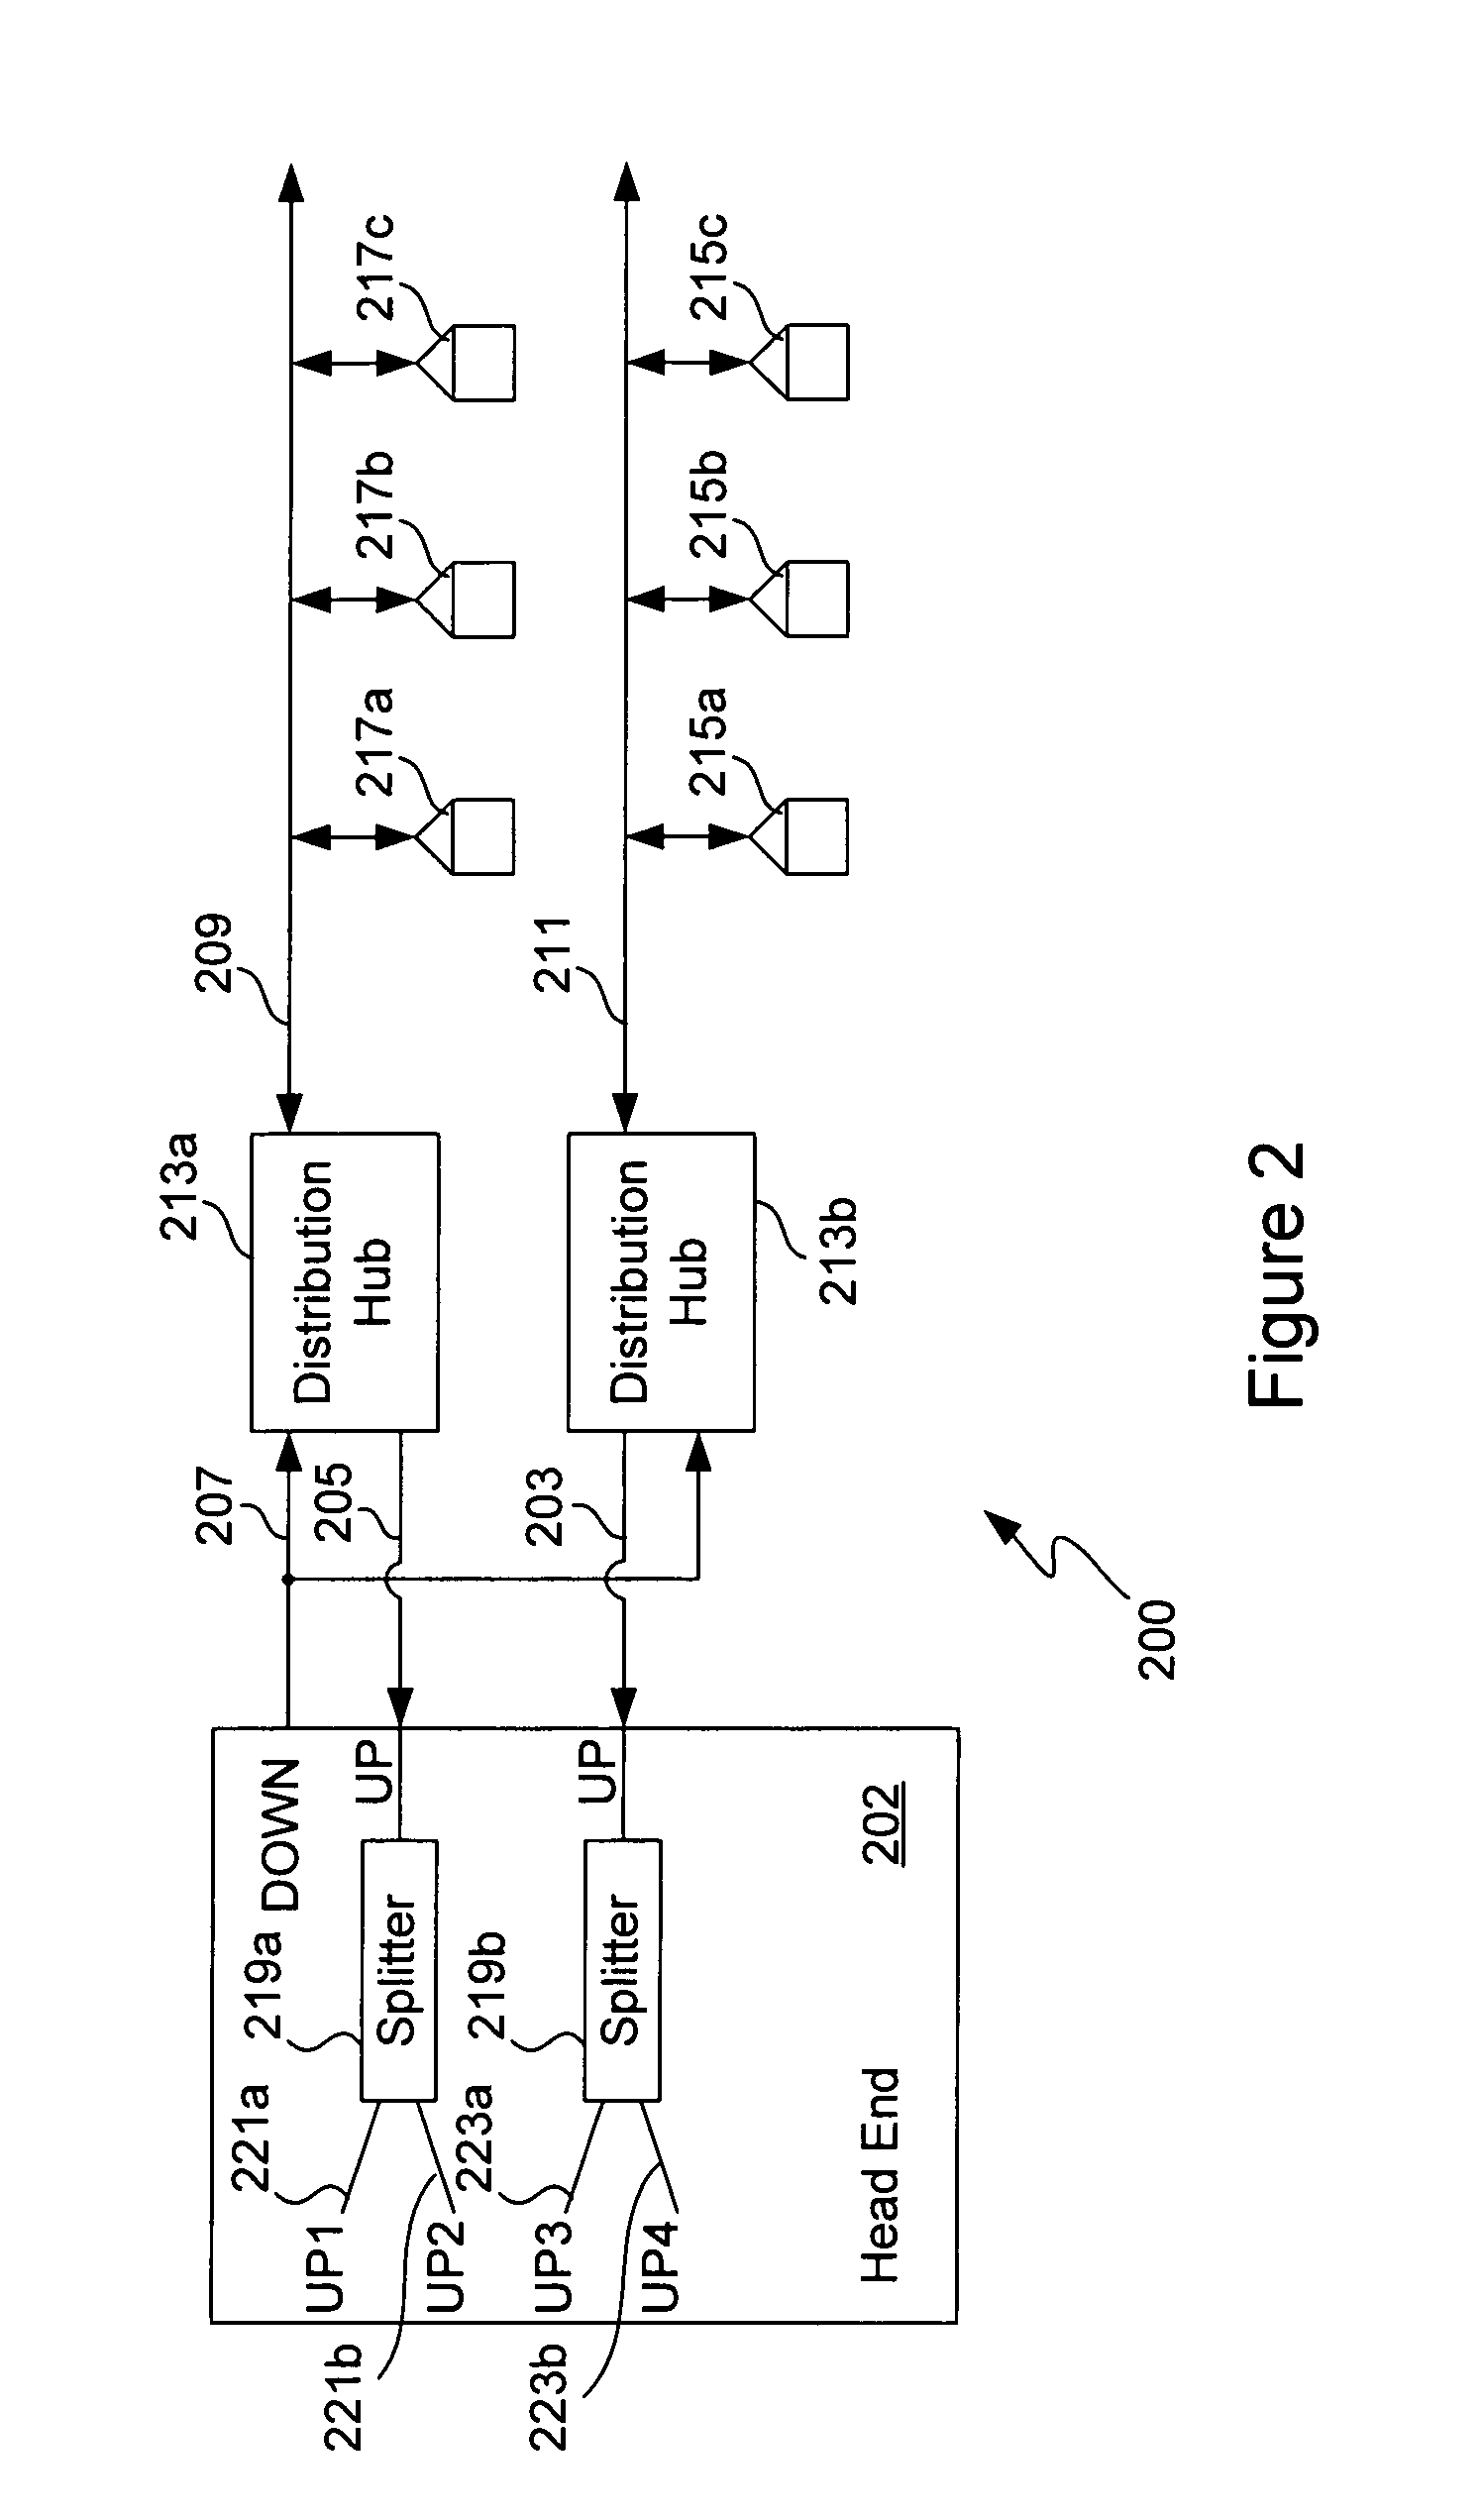 Data transmission over multiple upstream channels within a cable modem system